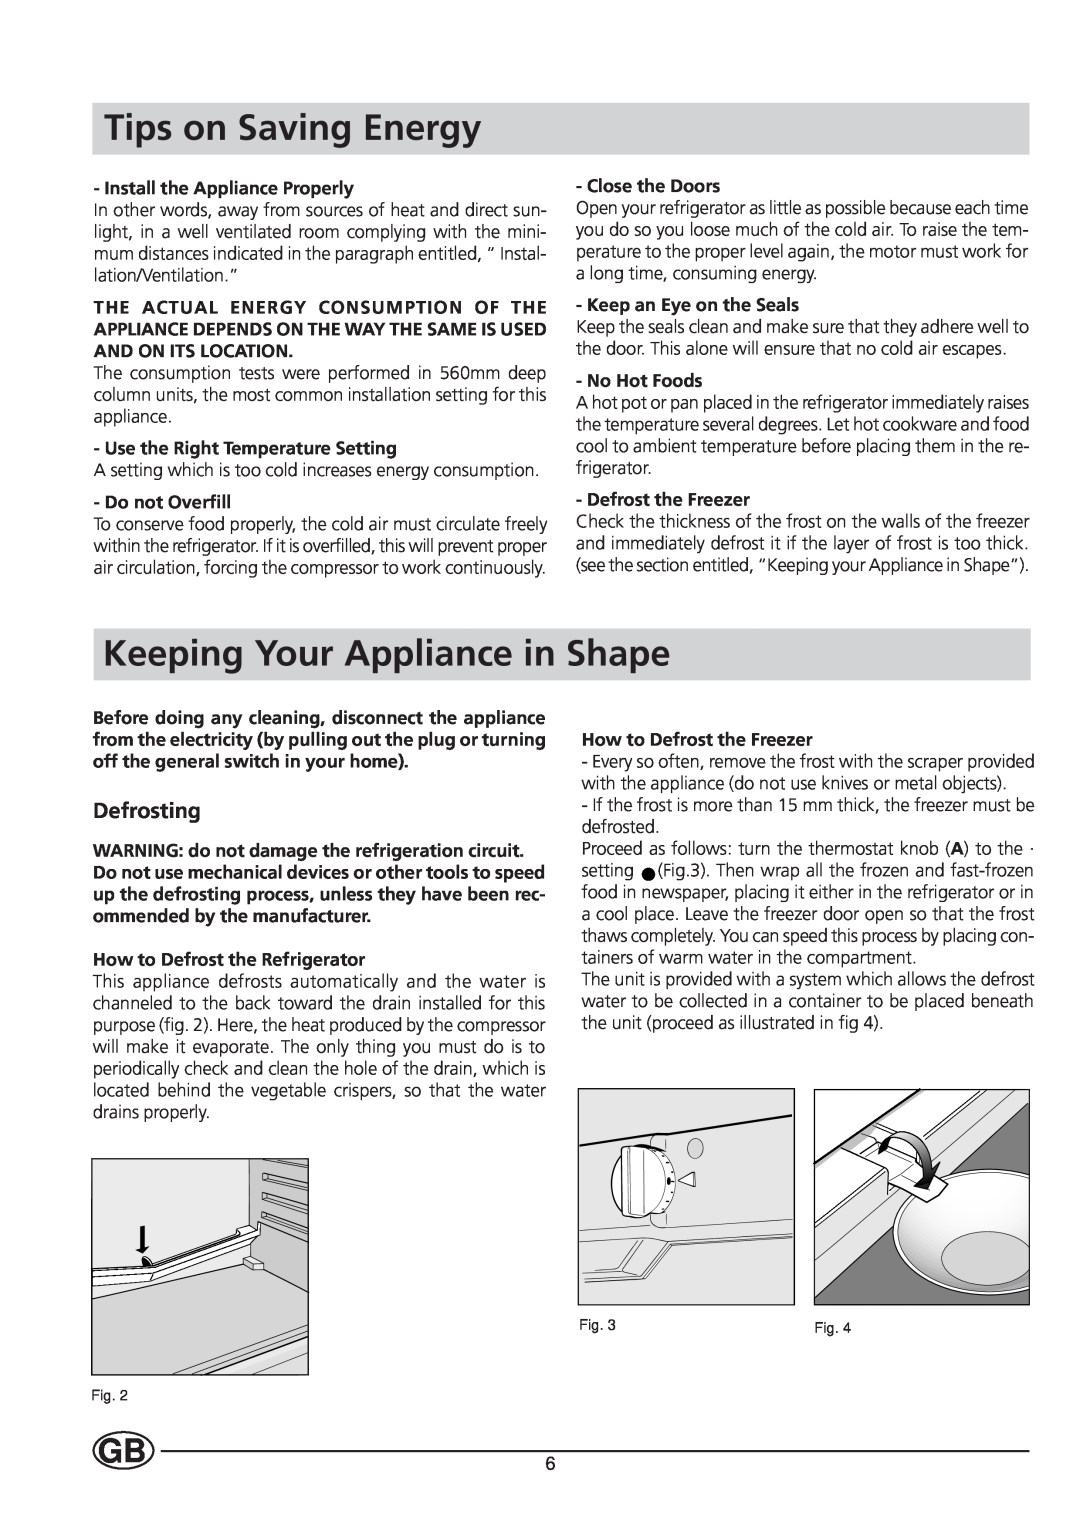 Indesit IN-C 3100 manual Tips on Saving Energy, Keeping Your Appliance in Shape, Defrosting 